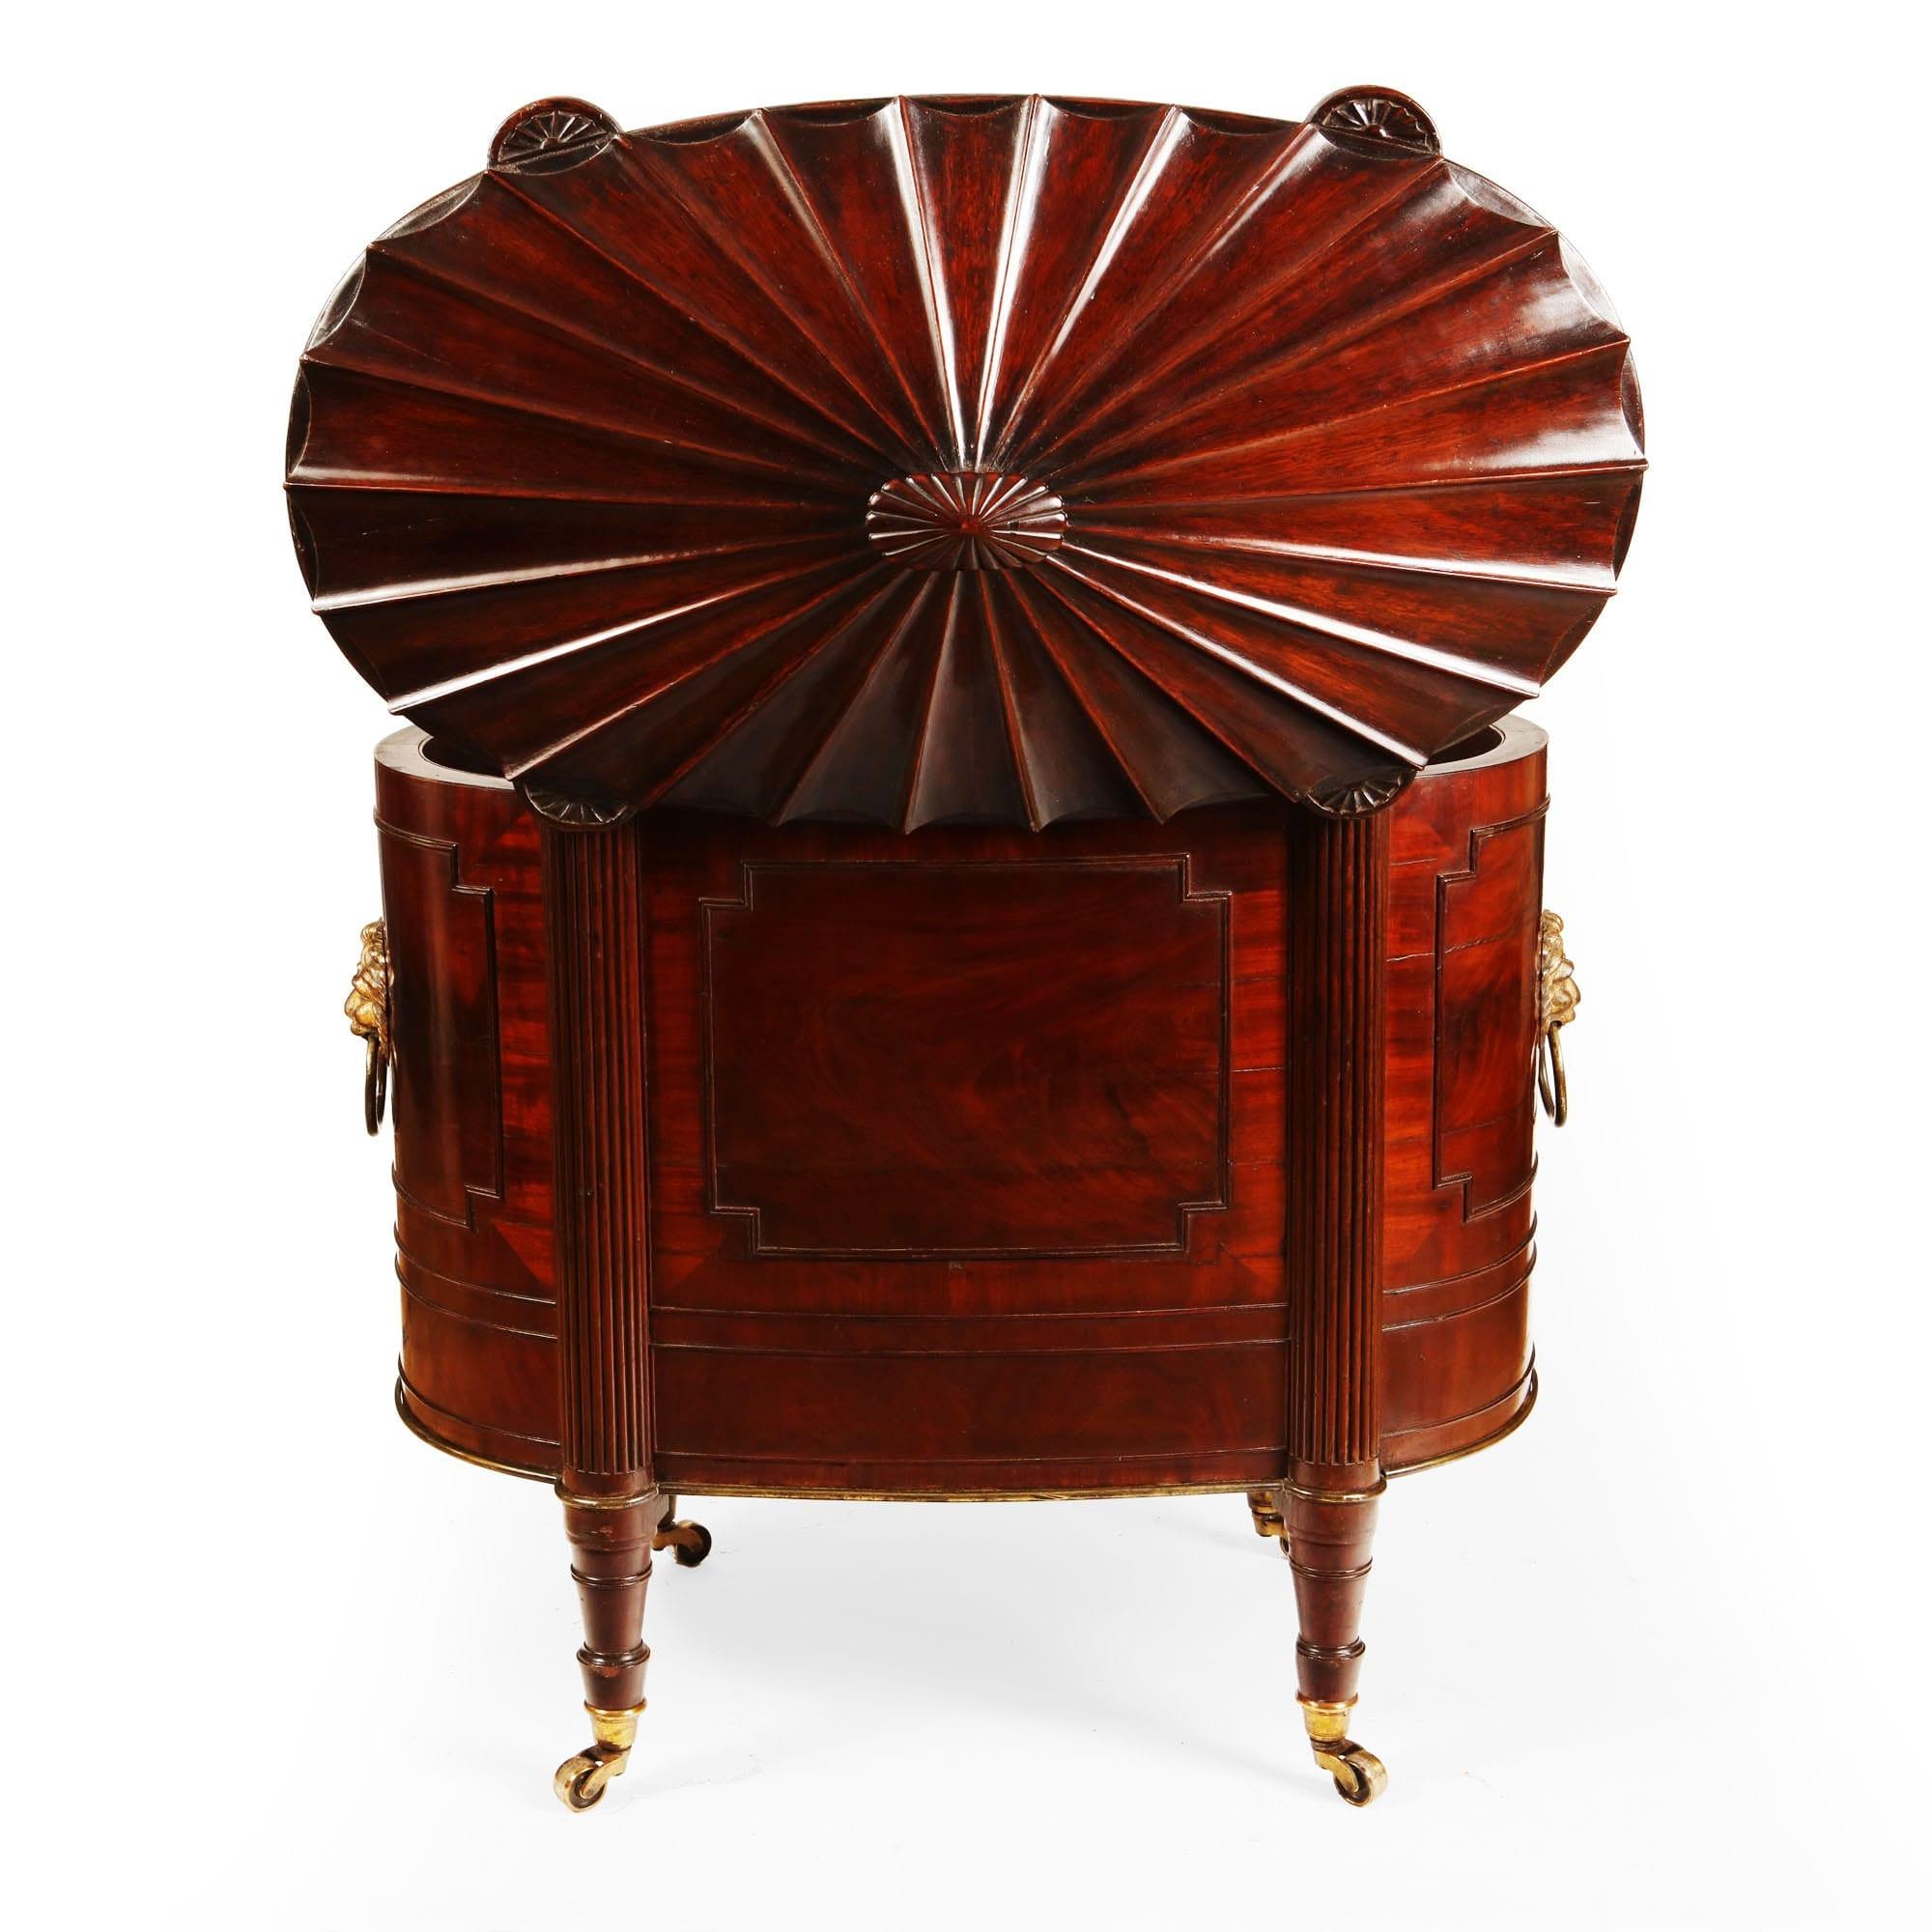 Nicholas Wells Antiques are delighted to offer this exceptional mahogany cellarette is constructed in an oval form with a superb hinged lid, decorated with tapering flutes and edged with a reeded border and inset carved patrae to the top of the four